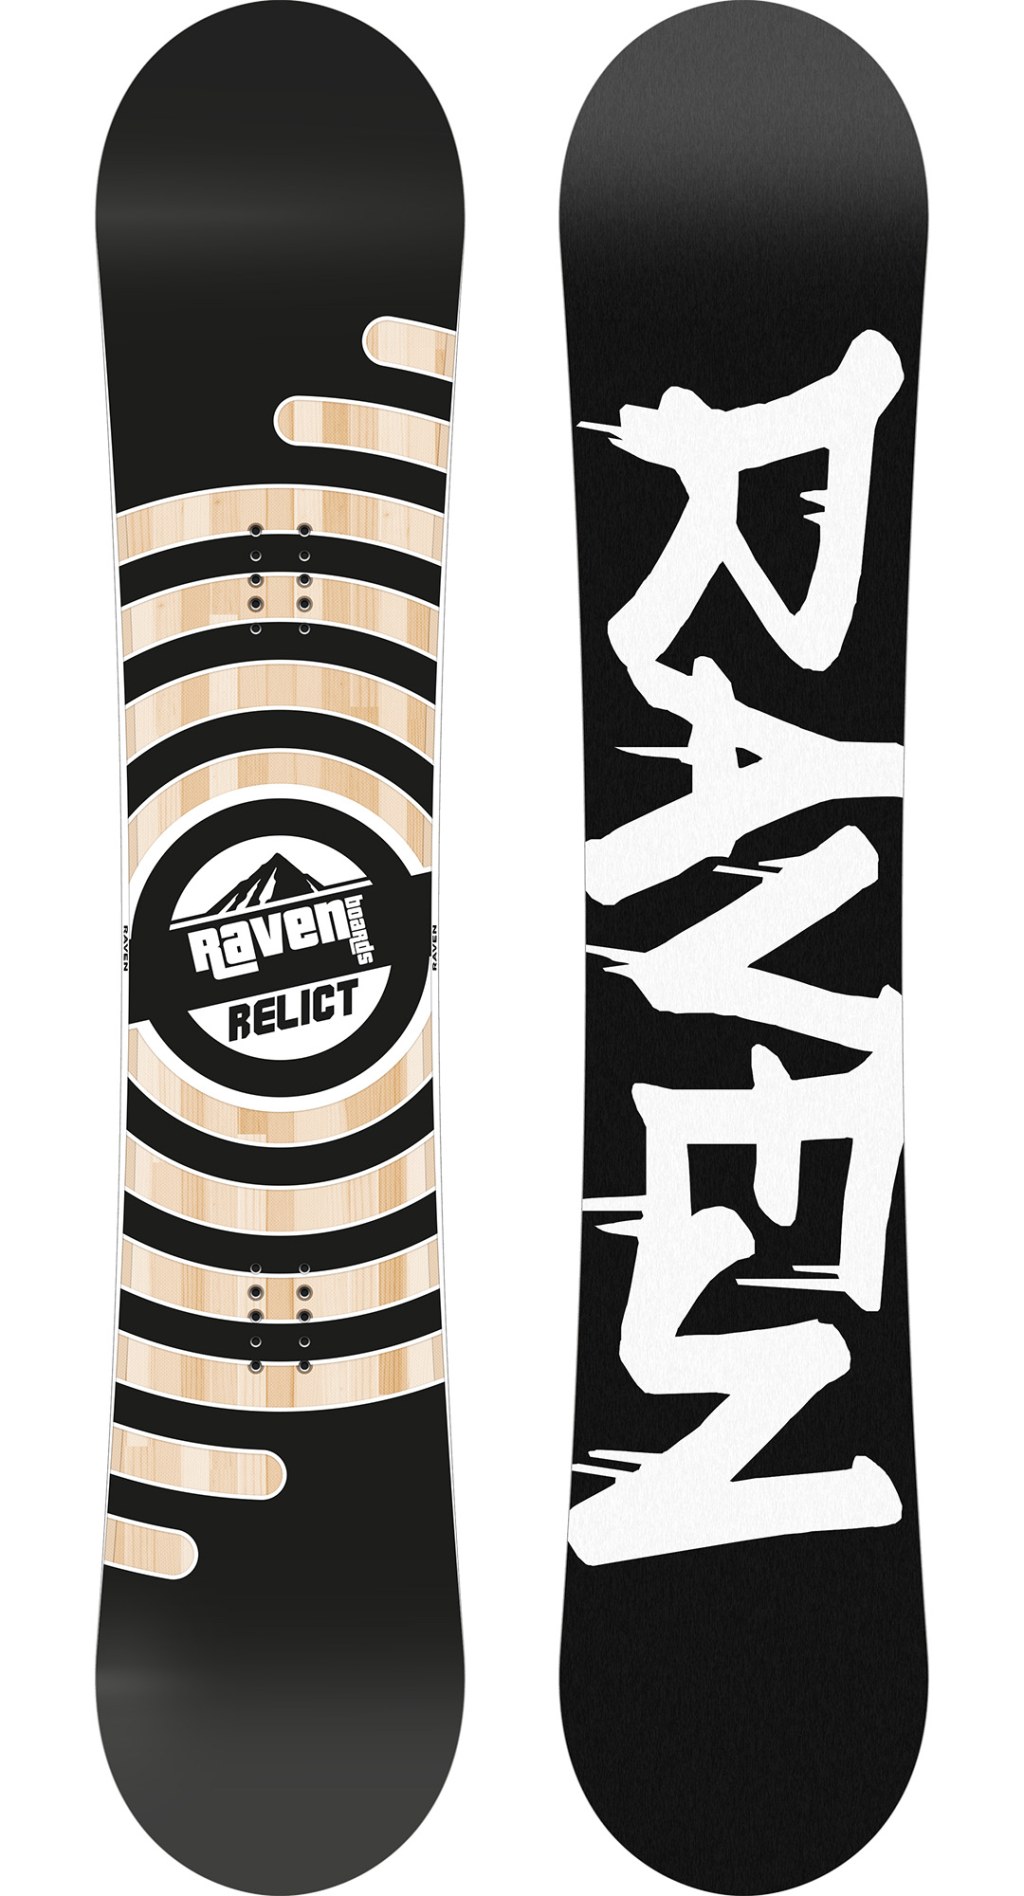 Picture of: Relict – Raven Snowboards